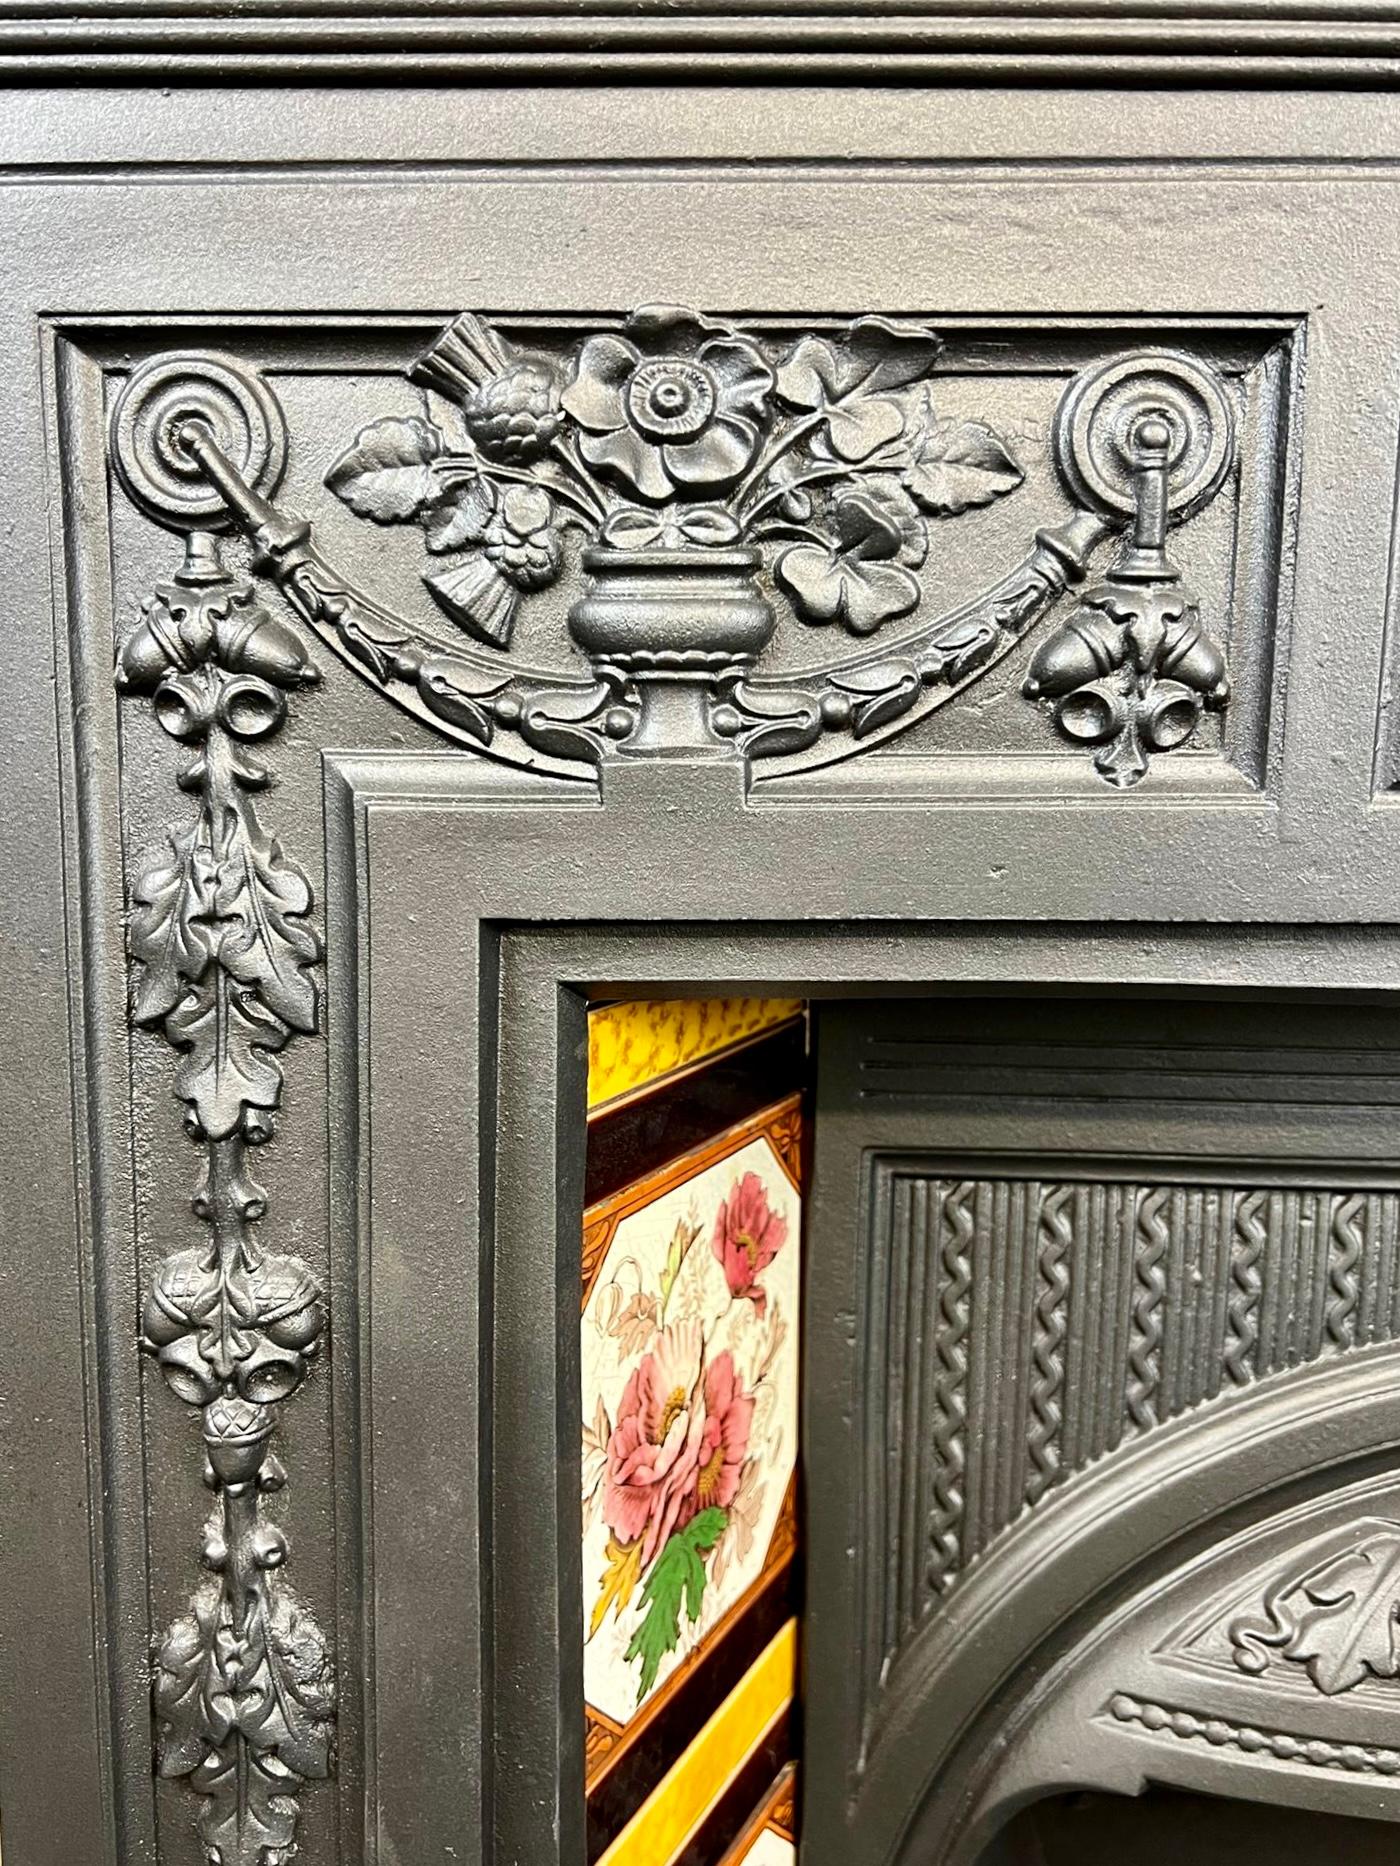 19th Century Victorian Cast Iron Tiled Combination Fireplace.
This Original Antique Fireplace Has A Typical Floral Victorian Designed Pattern, With Original Iron Front Bars, Canopy Hood, Back And Ceramic Hand Painted Victorian Set Of Tiles.